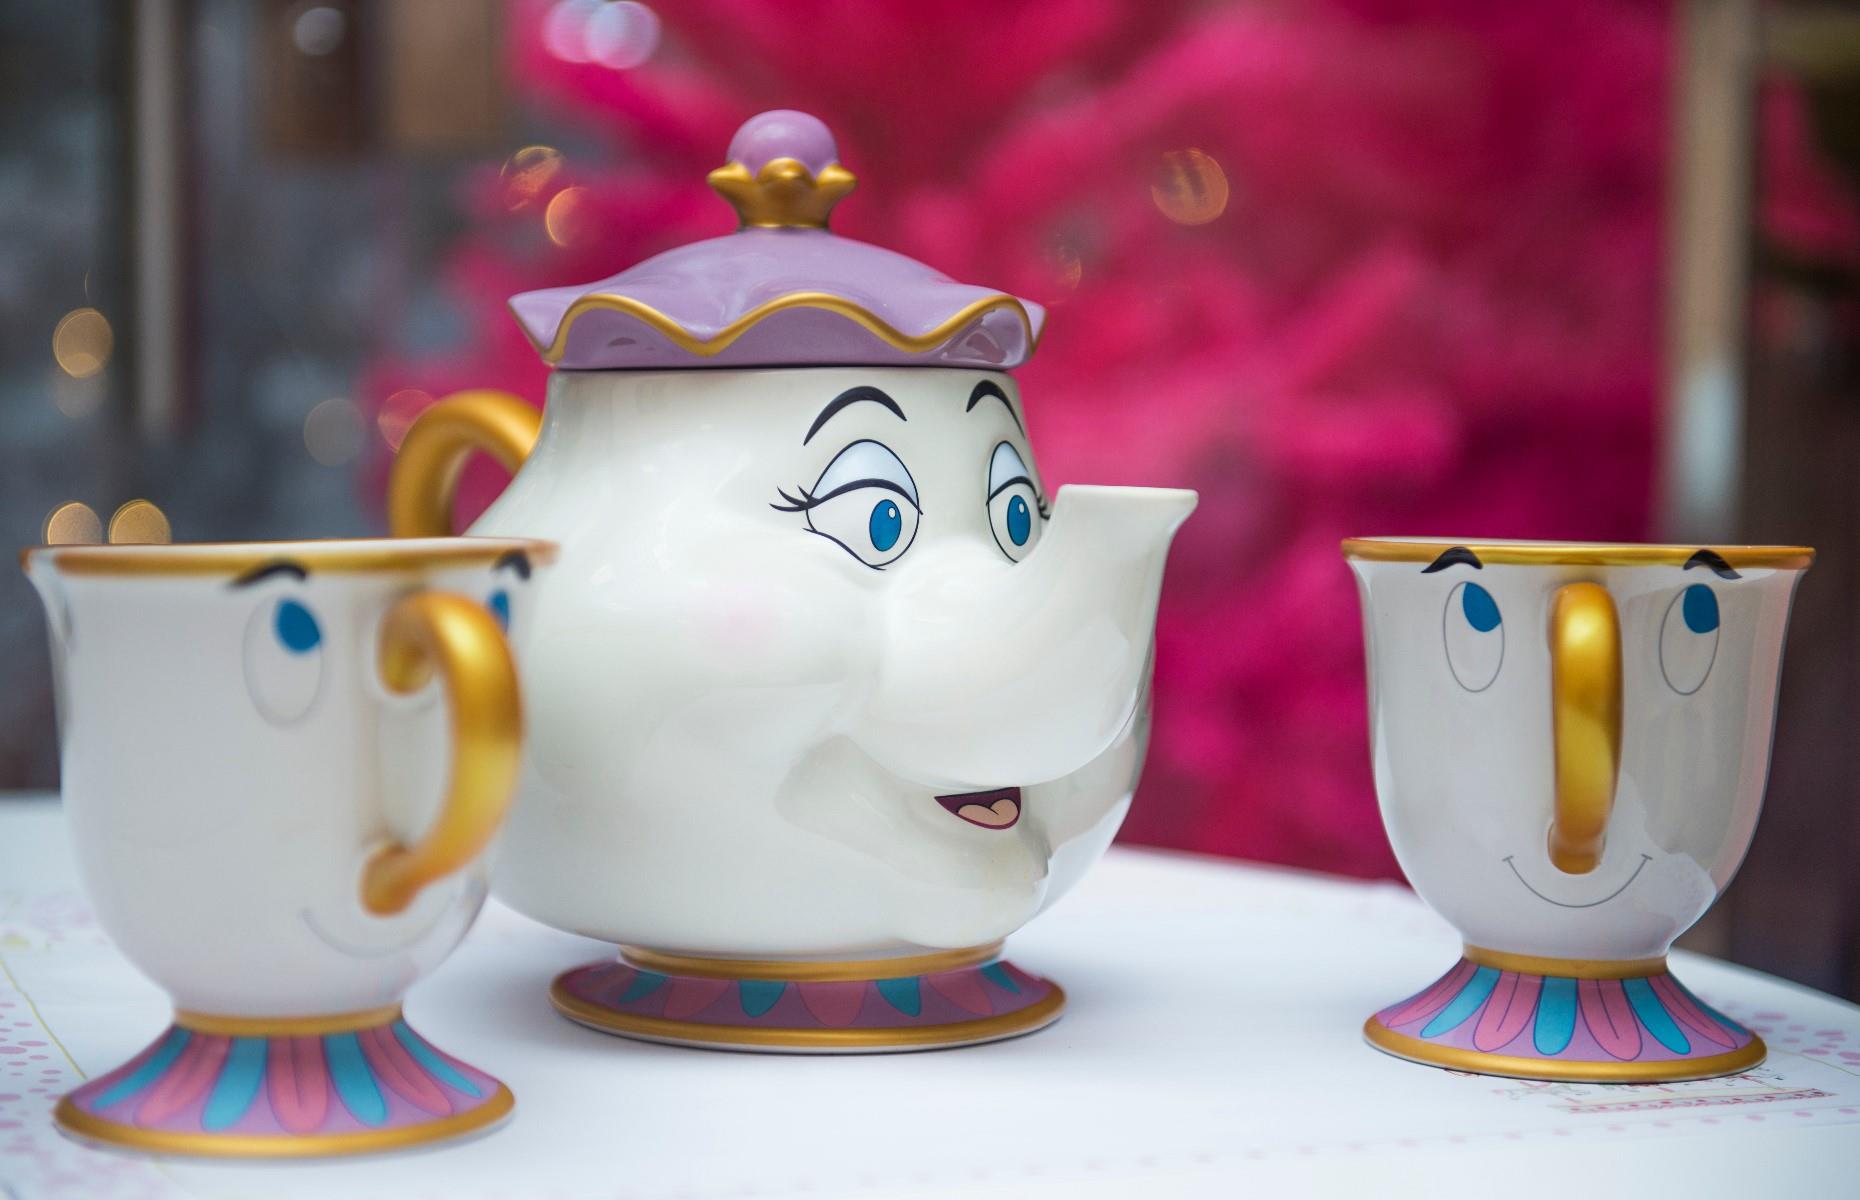 Disney Beauty and the Beast Toy China tea set: up to $150 (£116)